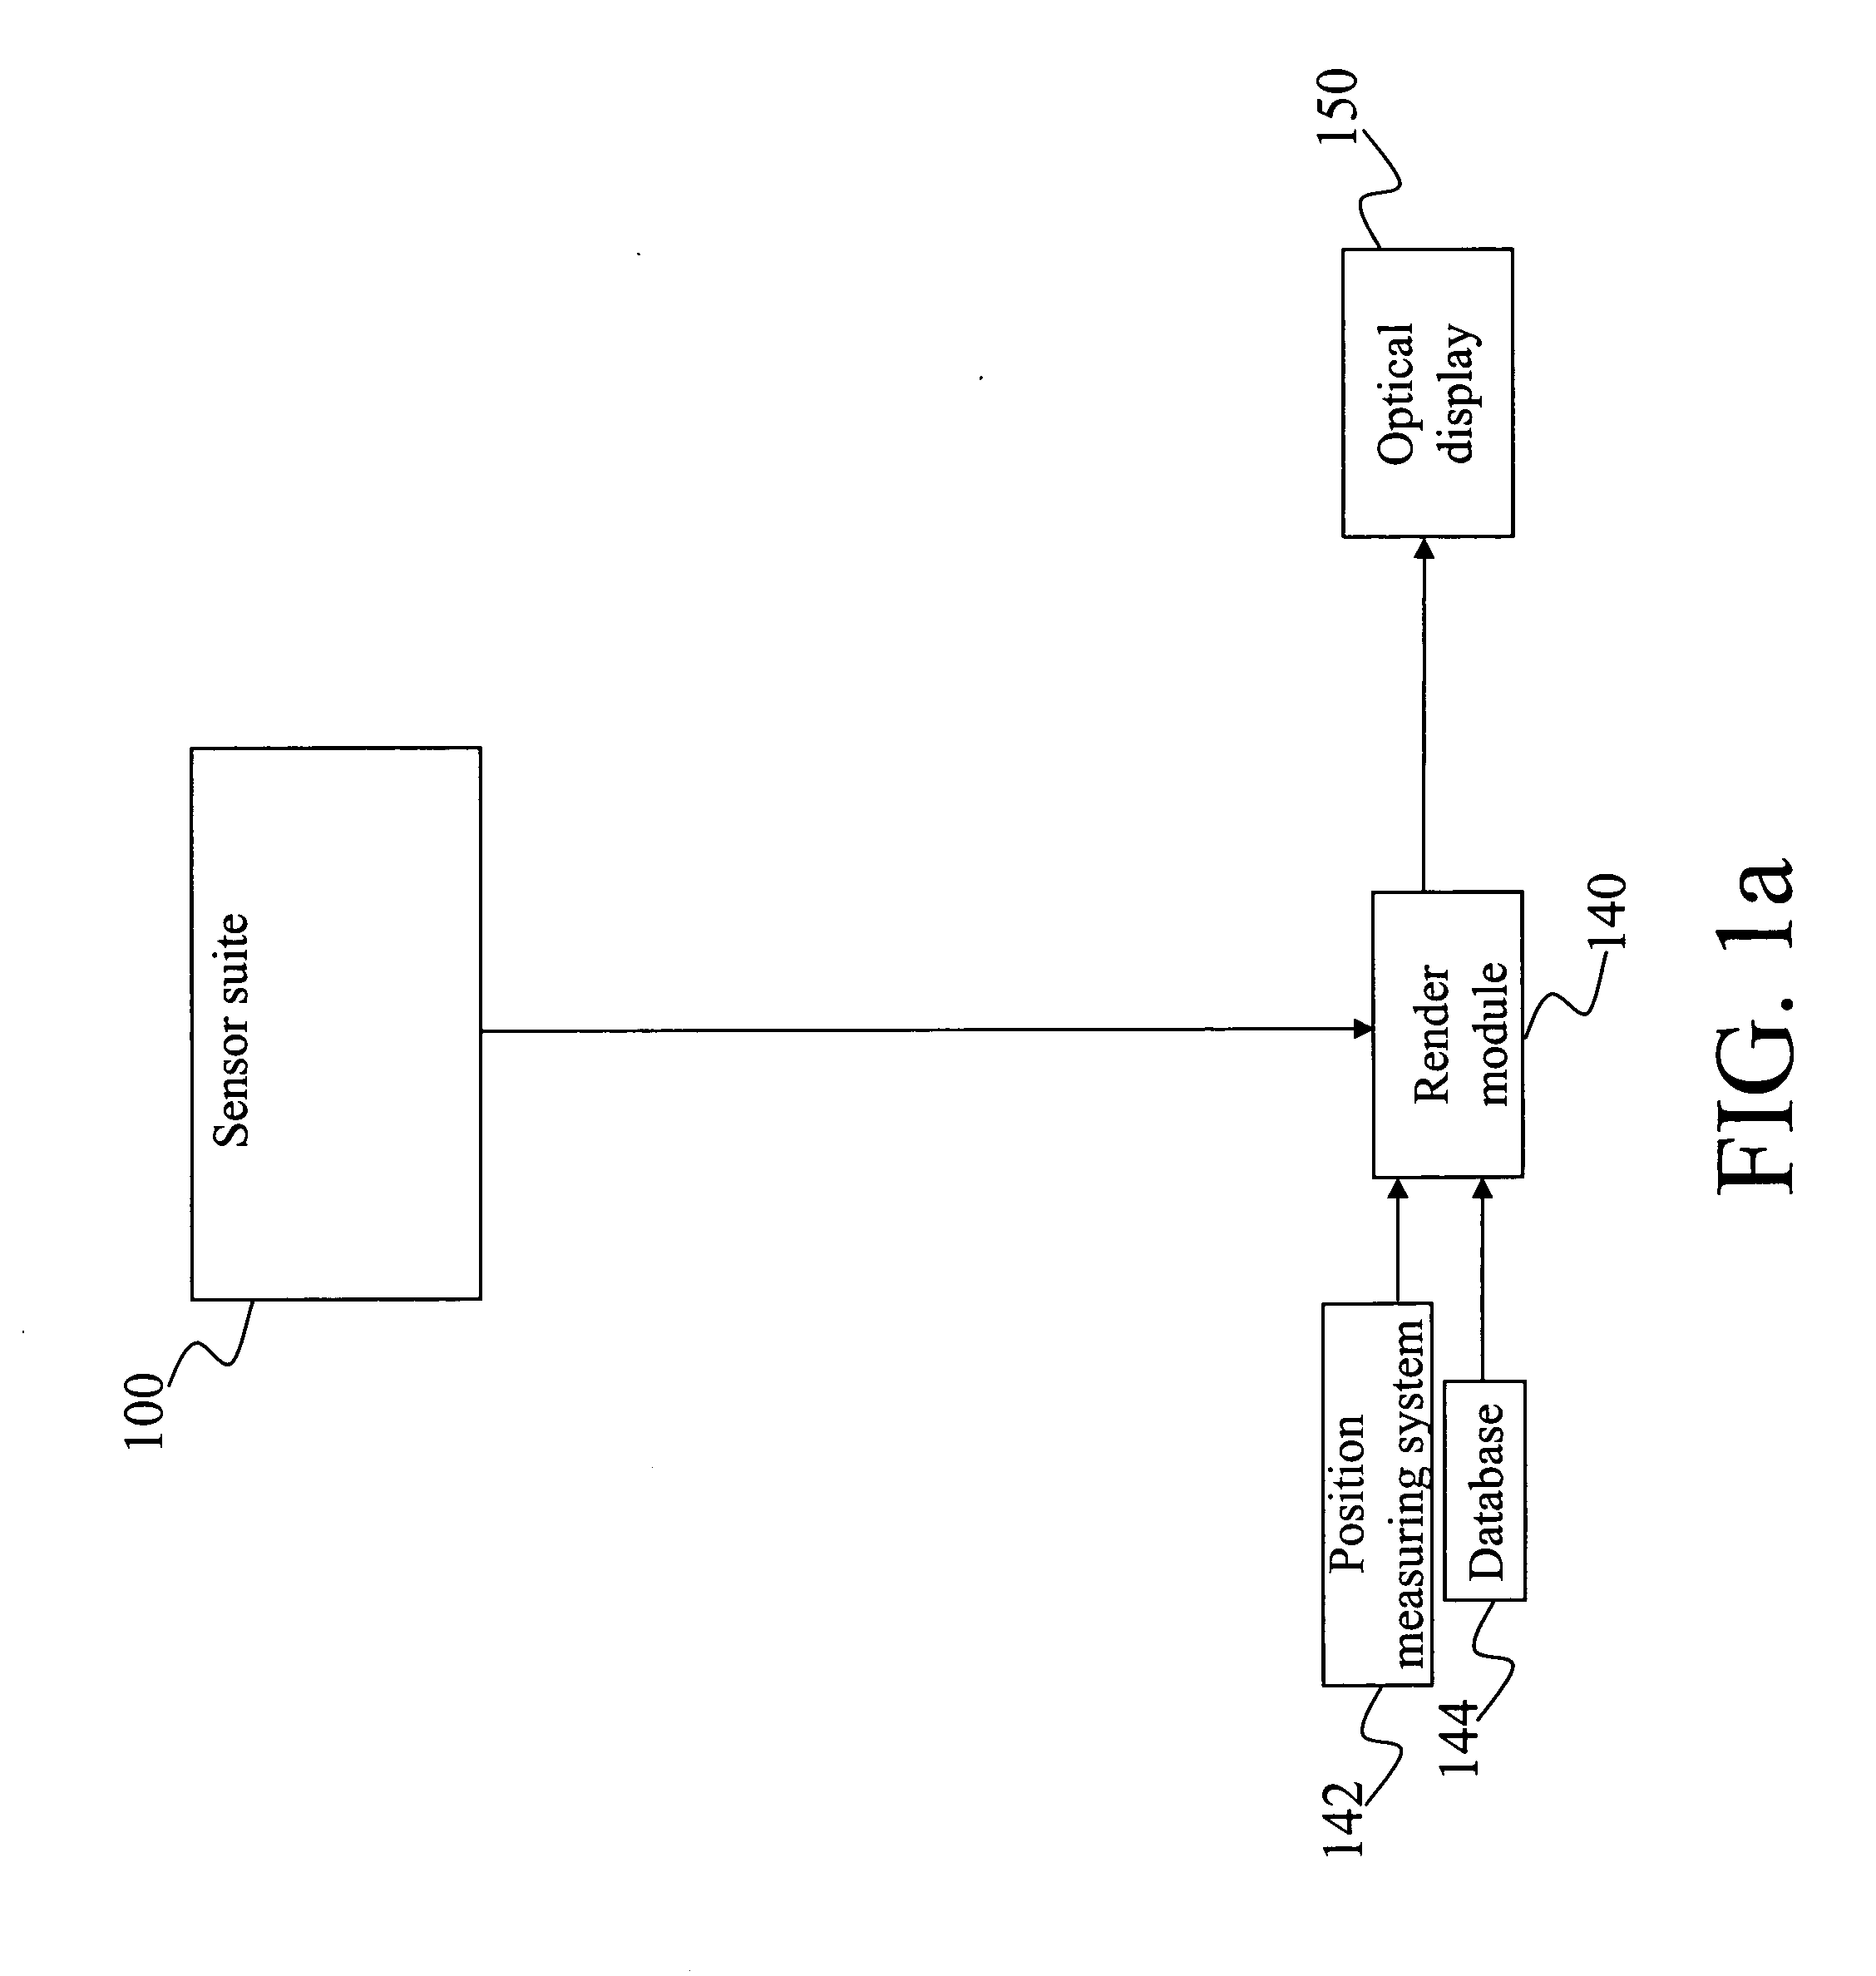 Method and apparatus for image enhancement